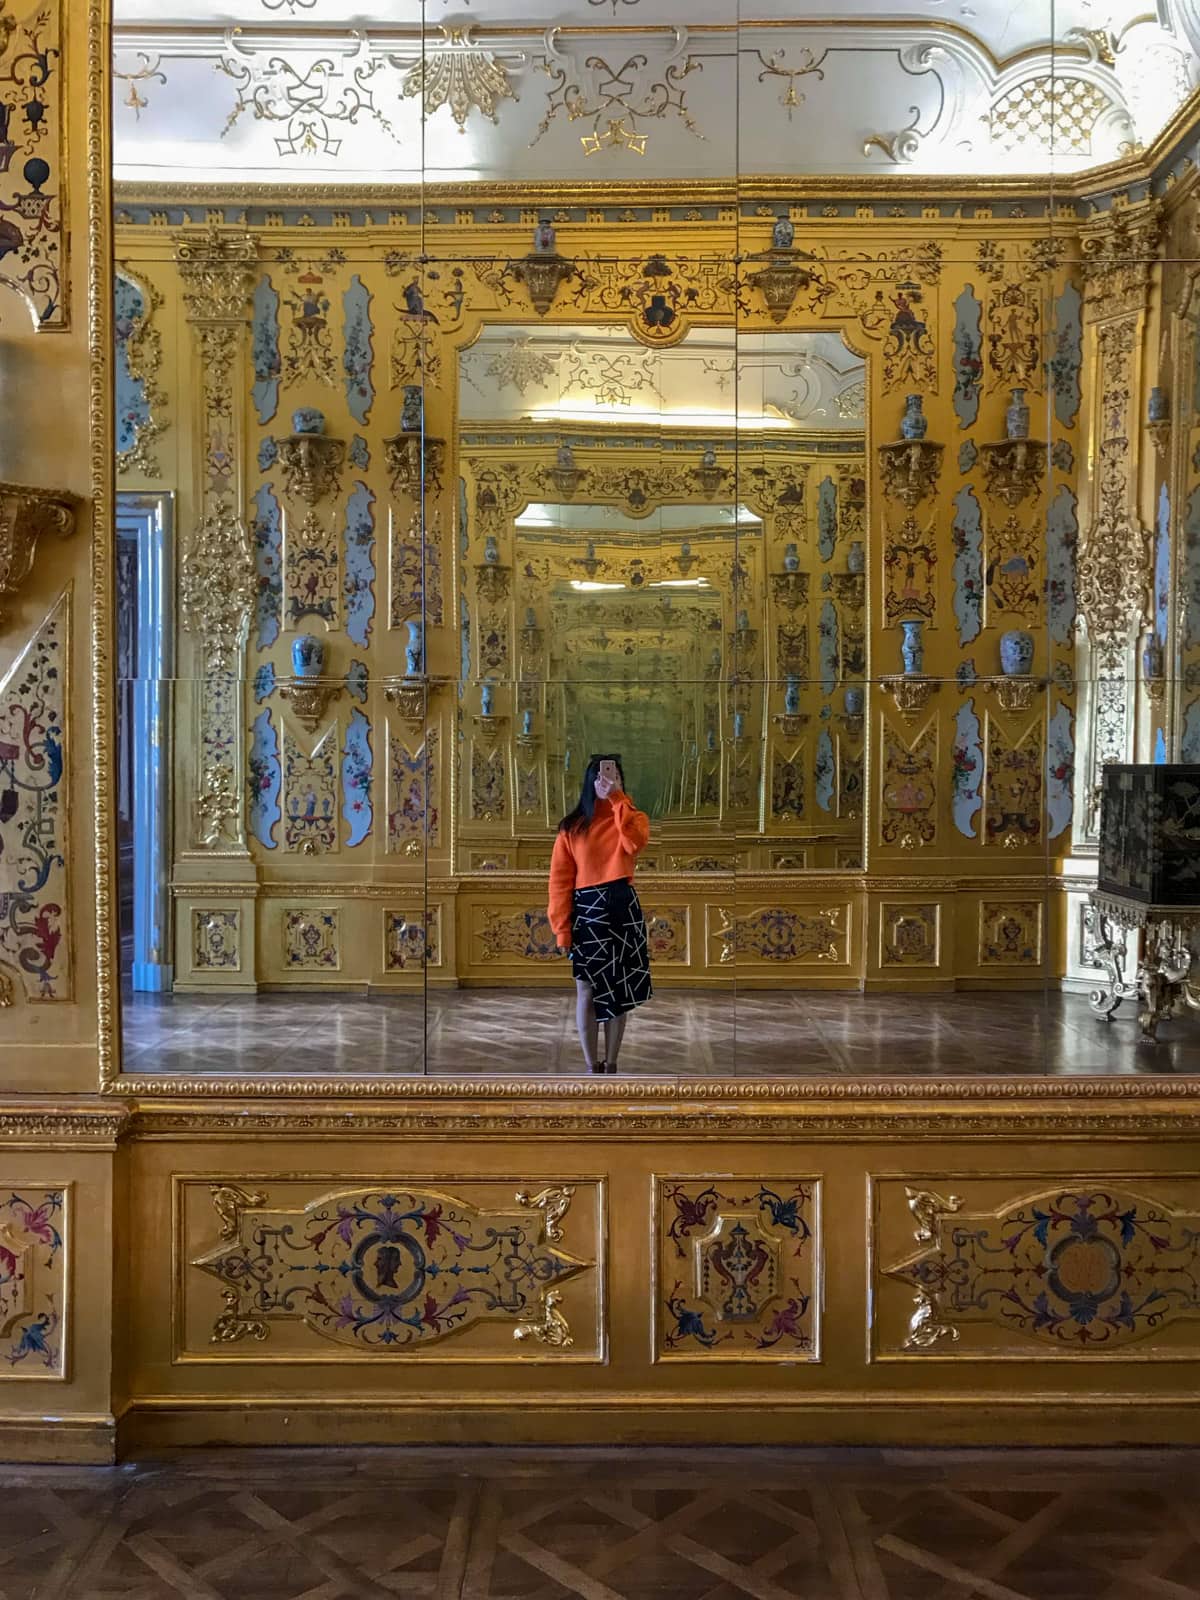 A mirror reflection of a woman taking a selfie using her phone. She is wearing a layered patterned black skirt and an orange sweater. Her face cannot be seen